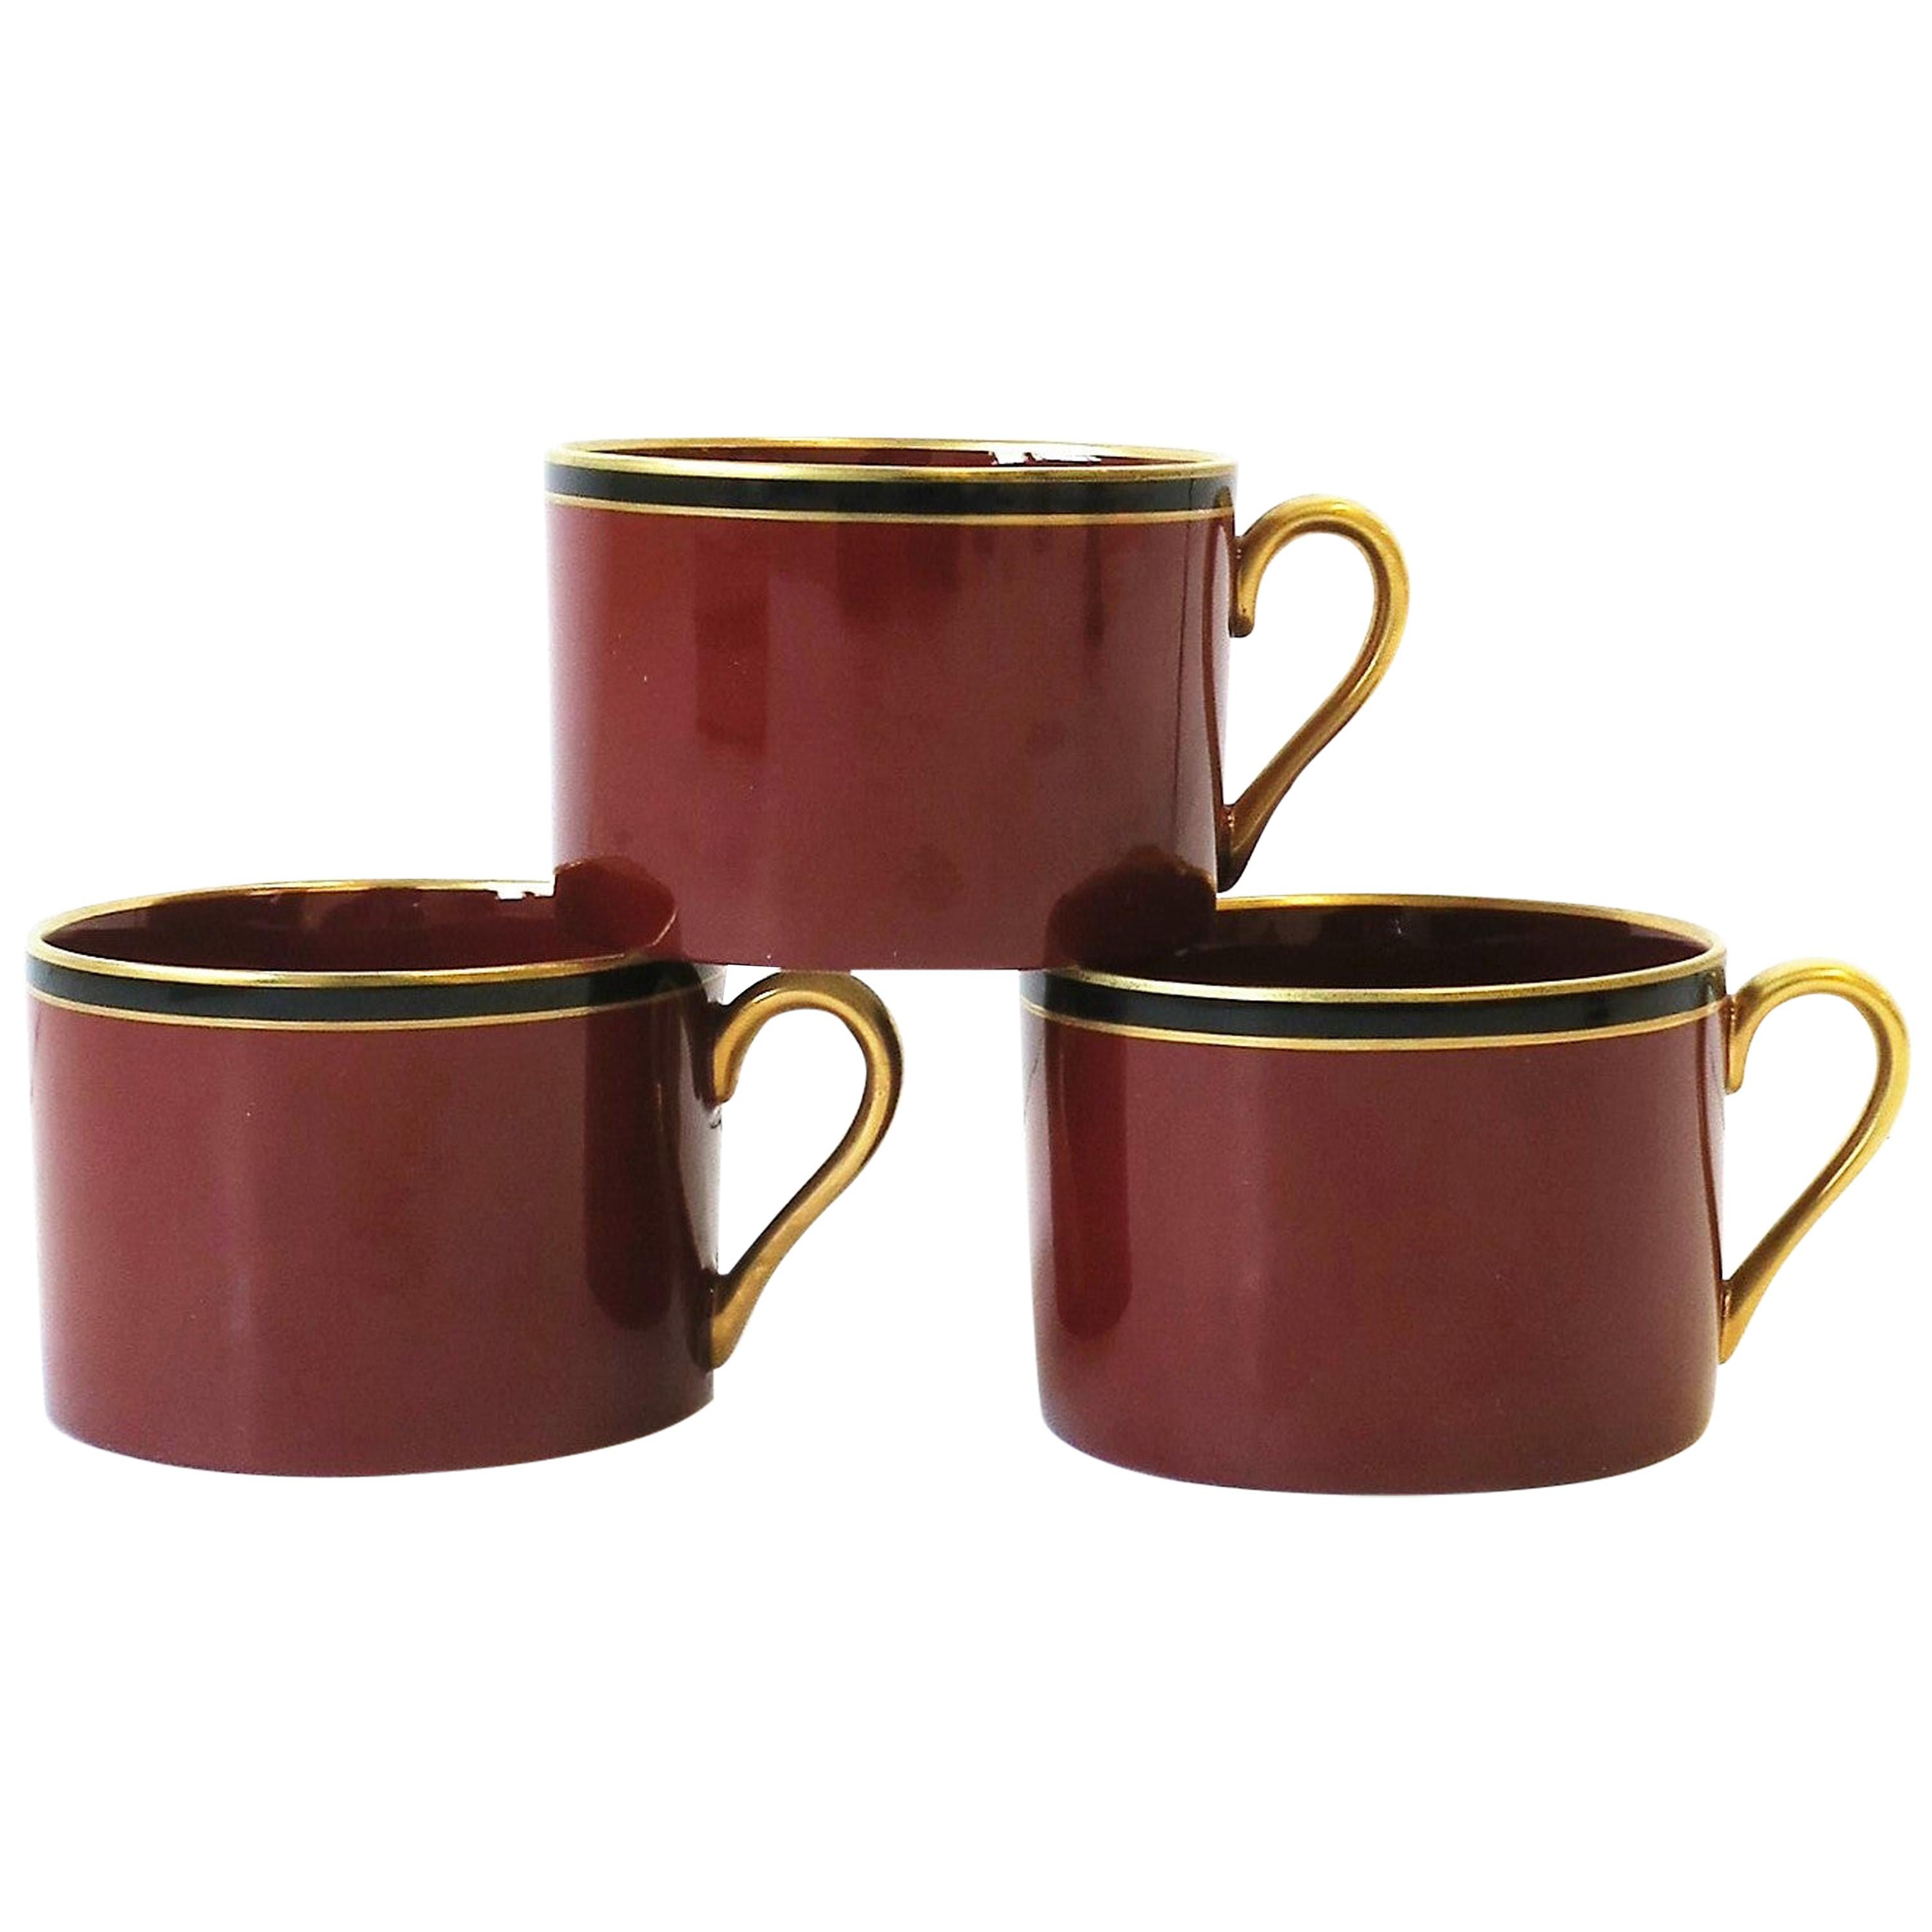 Red Burgundy, Gold and Black Porcelain Coffee or Tea Cups, Set of 3, 1967